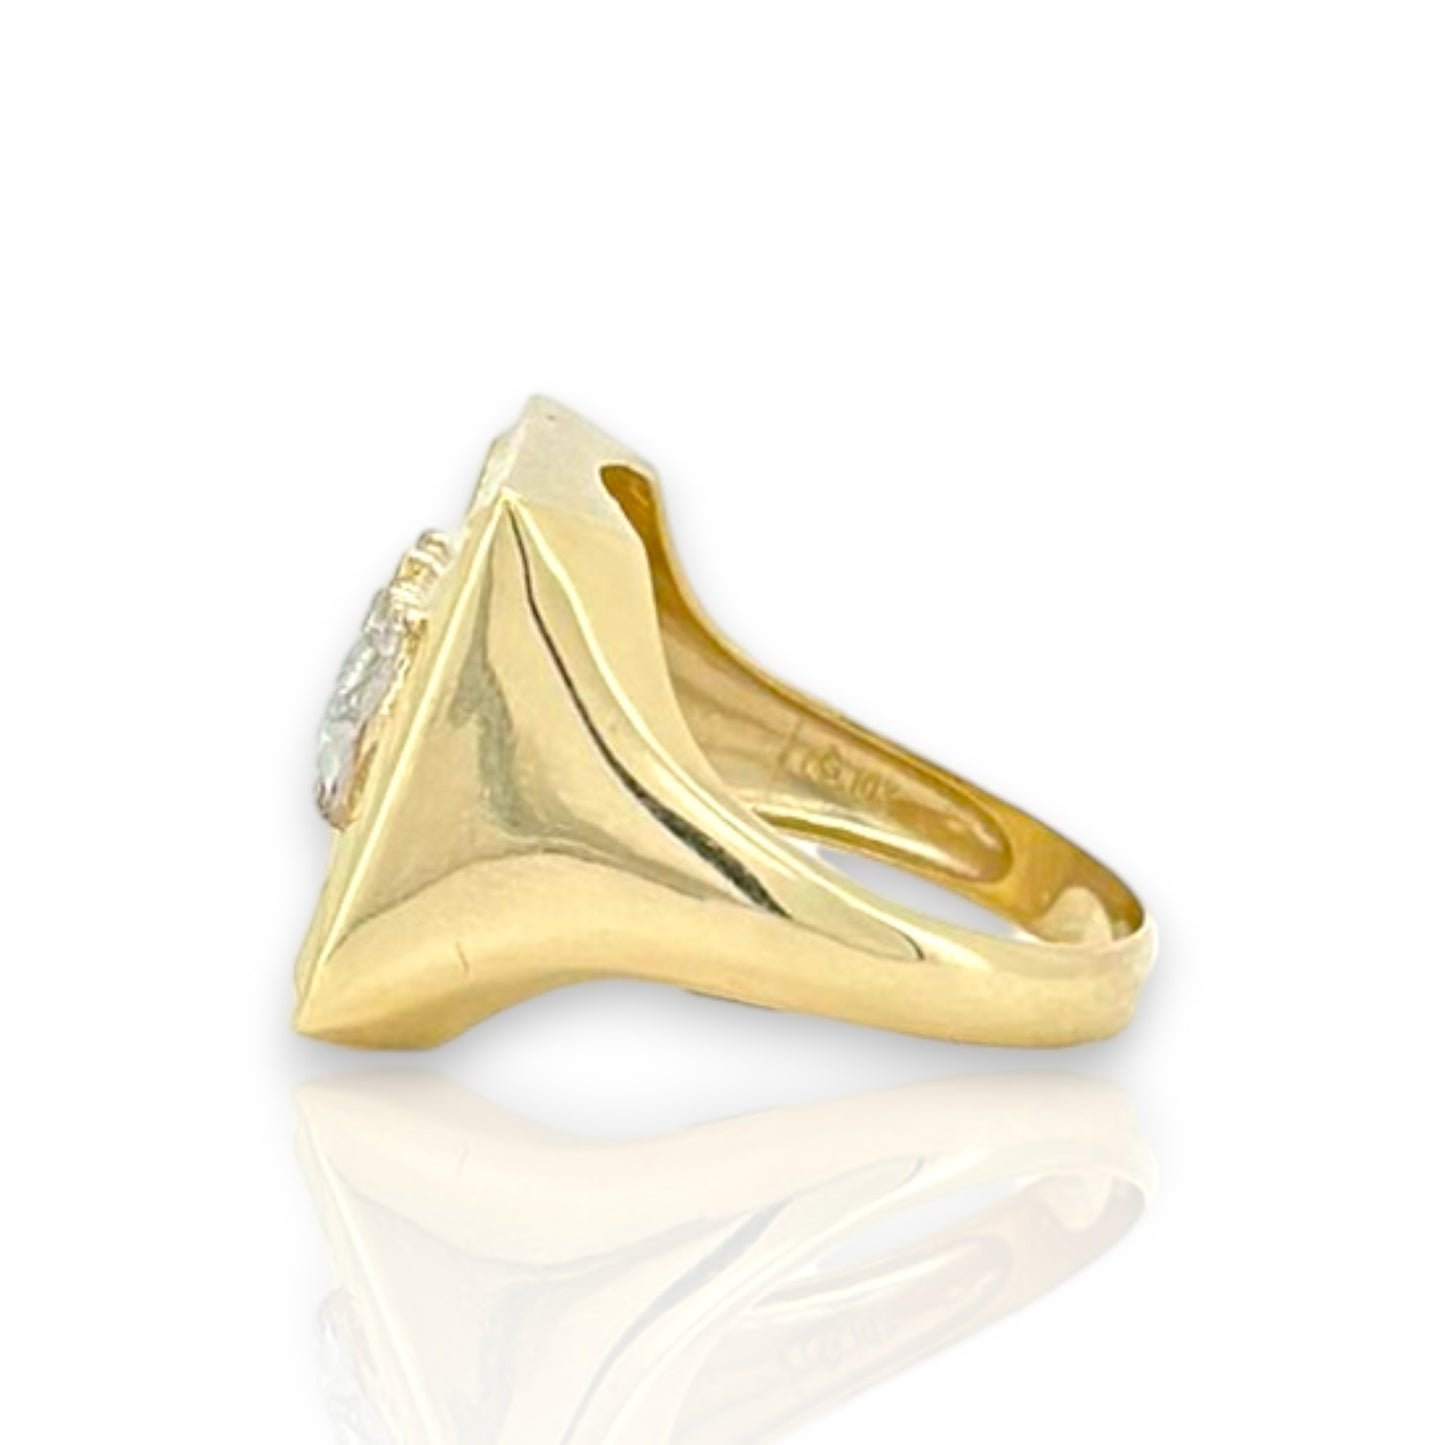 Last Supper Ring - 10K Yellow Gold